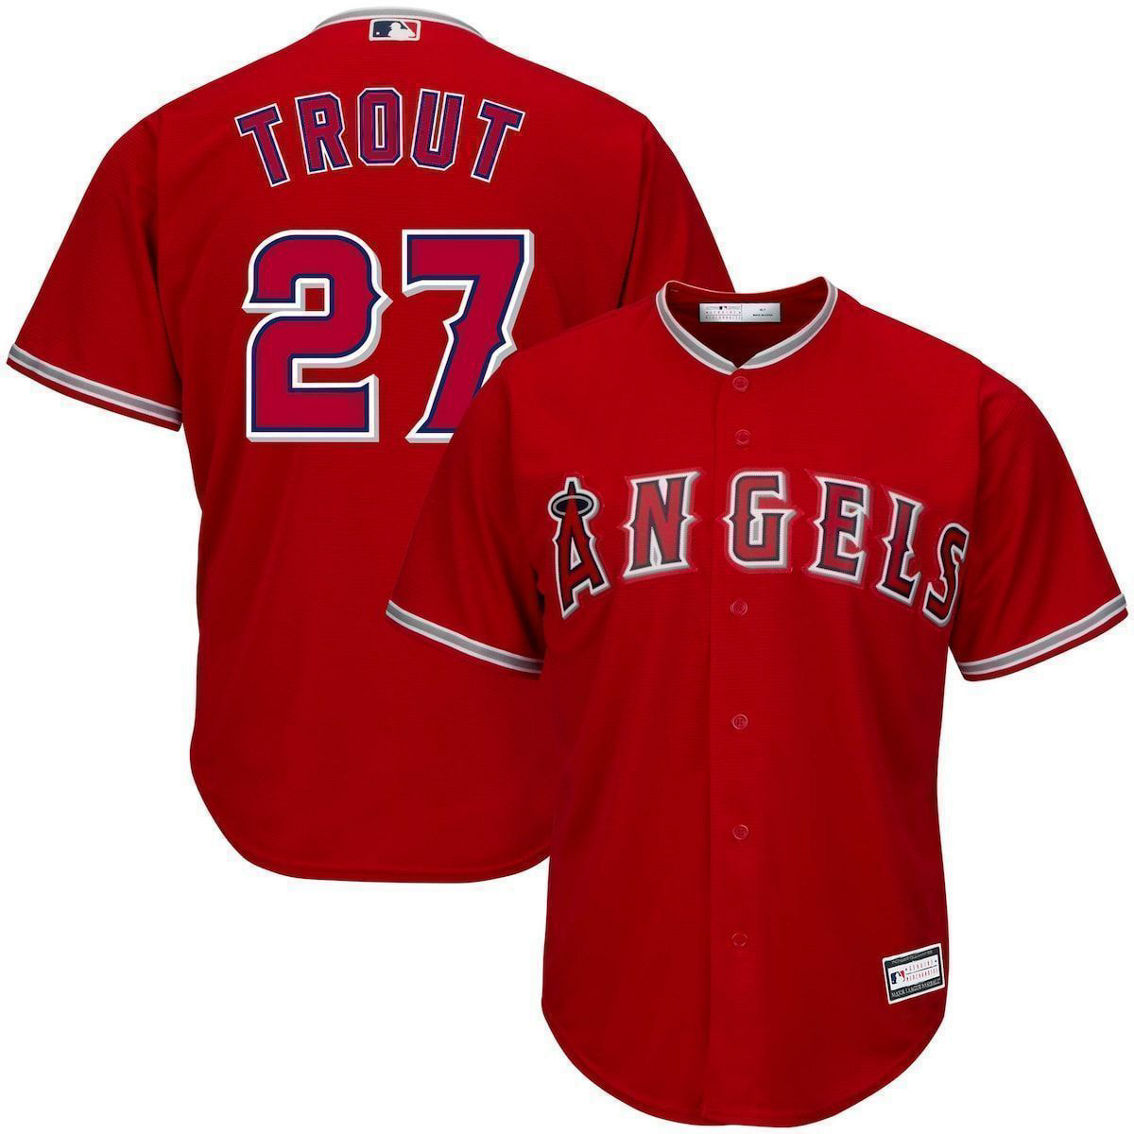 Profile Men's Mike Trout Red Los Angeles Angels Big & Tall Replica Player Jersey - Image 2 of 4